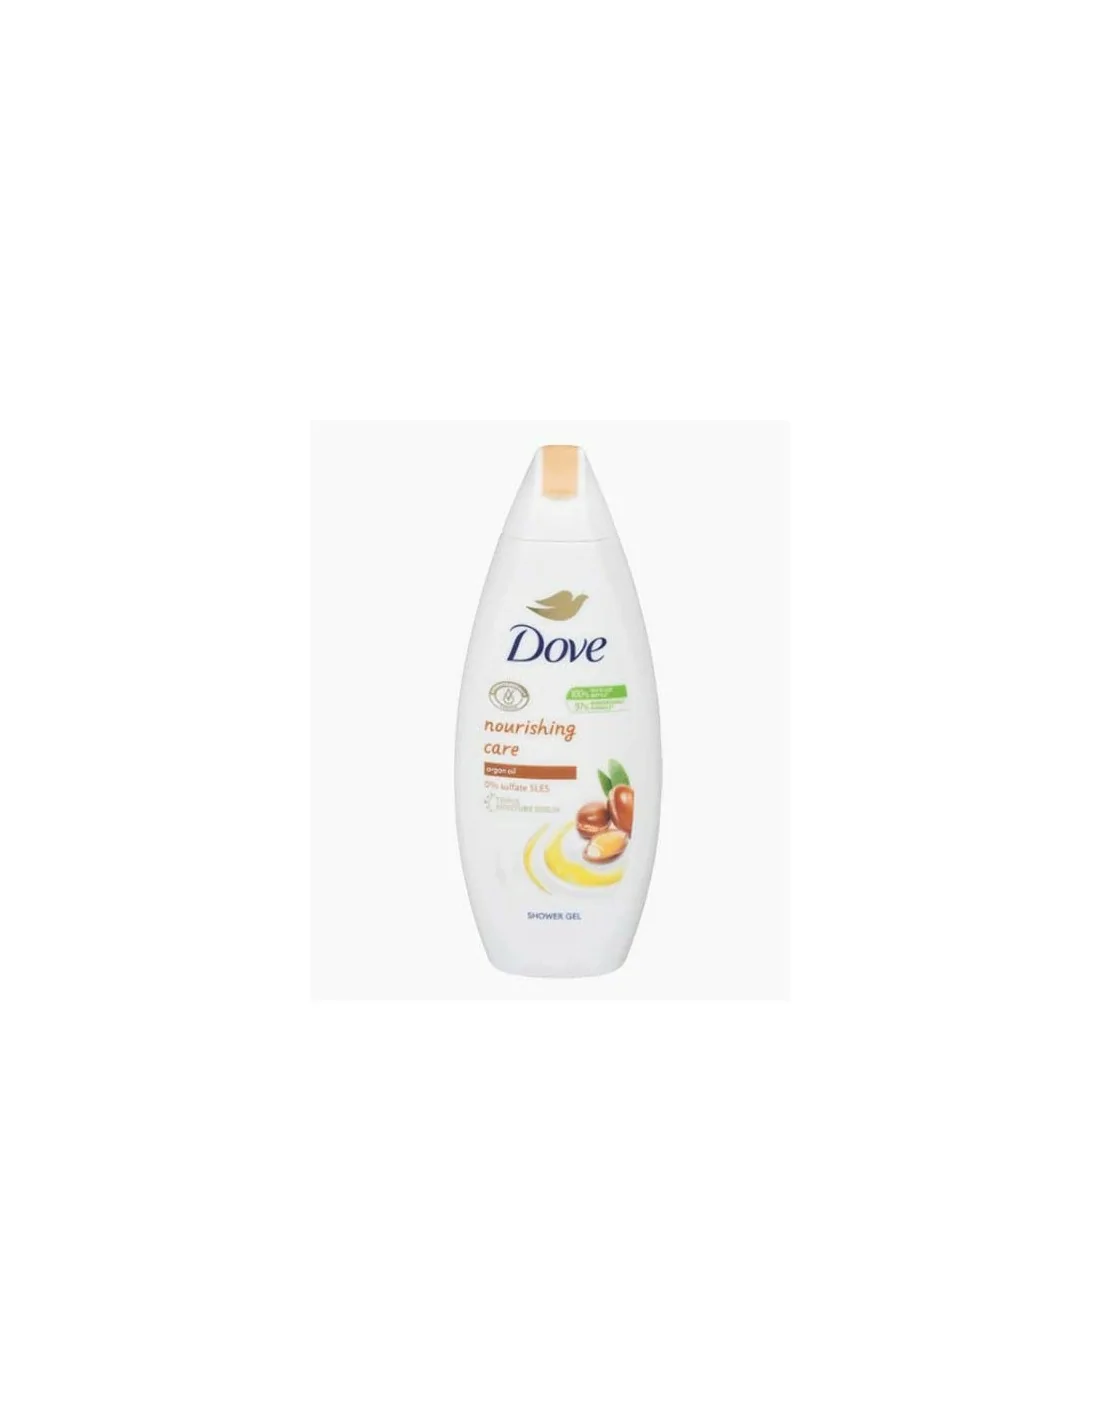 Dove Nourishing Care with Argan Oil Shower